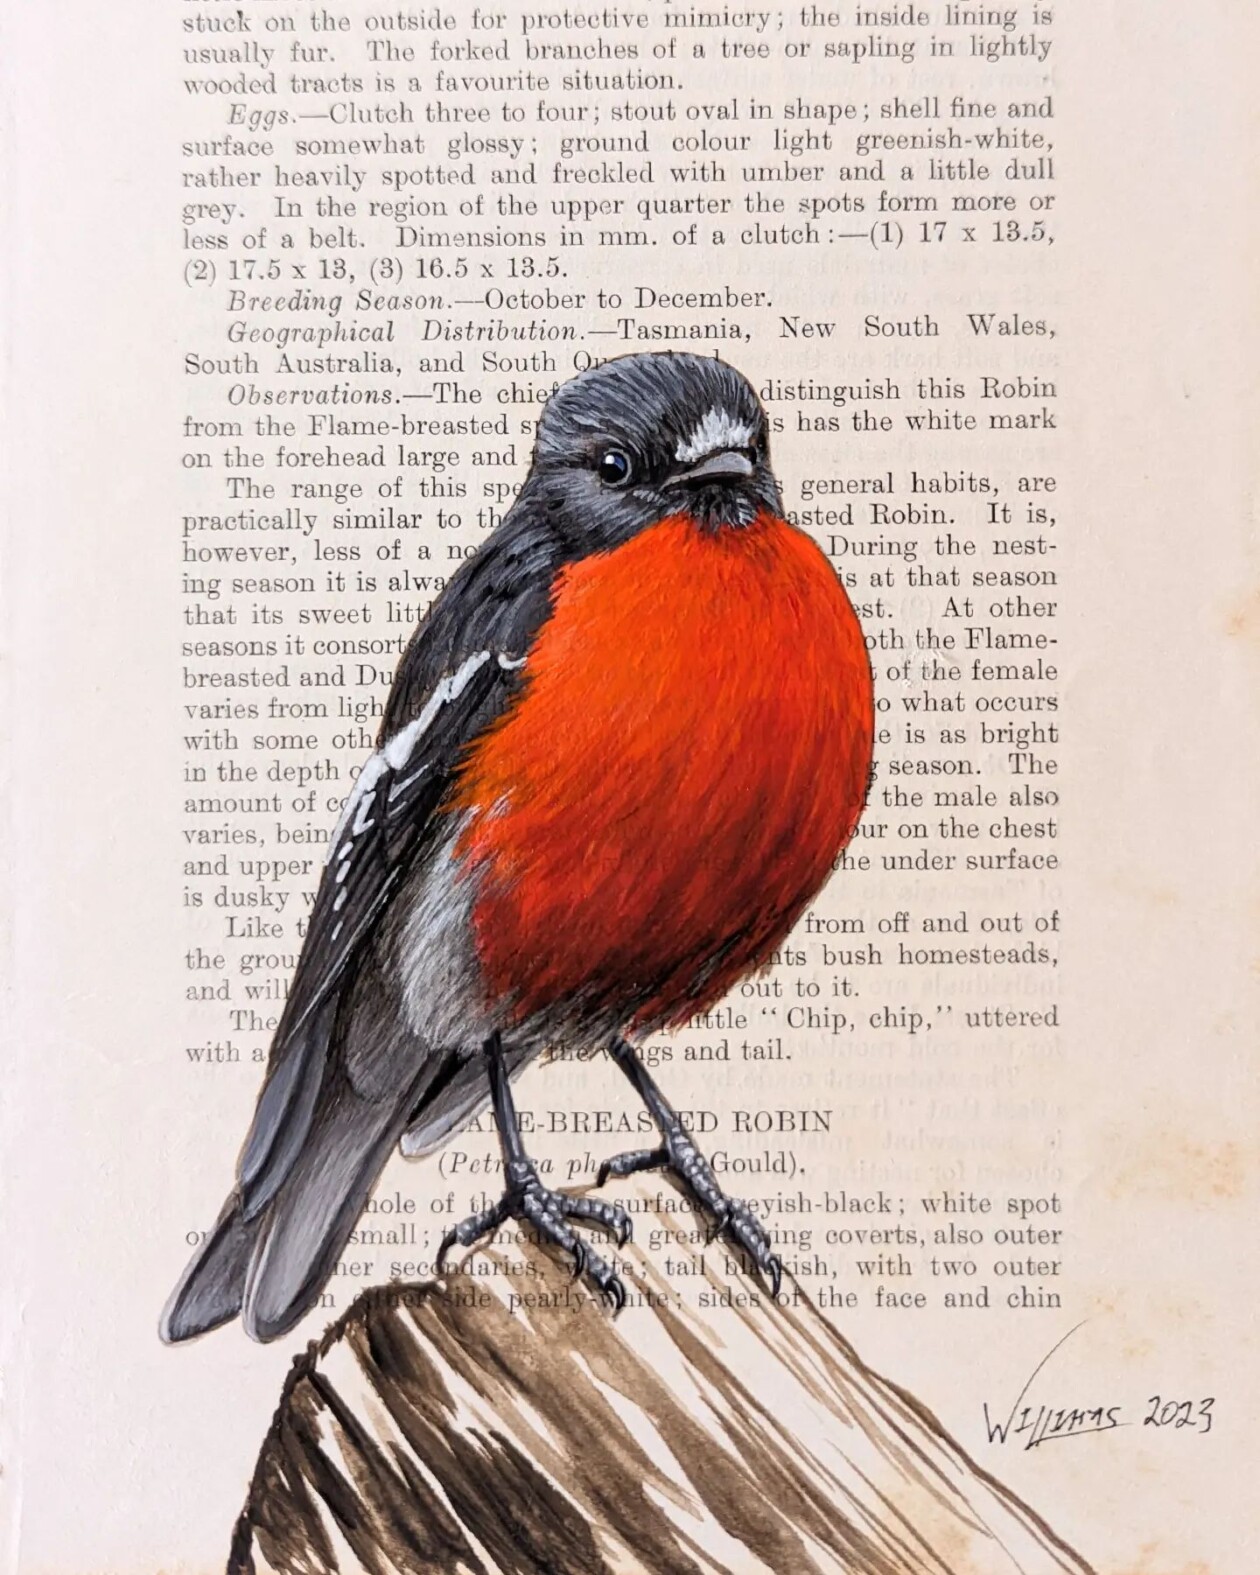 Exquisite Bird Paintings Added To Vintage Book Pages That Describe Them By Craig Williams (13)